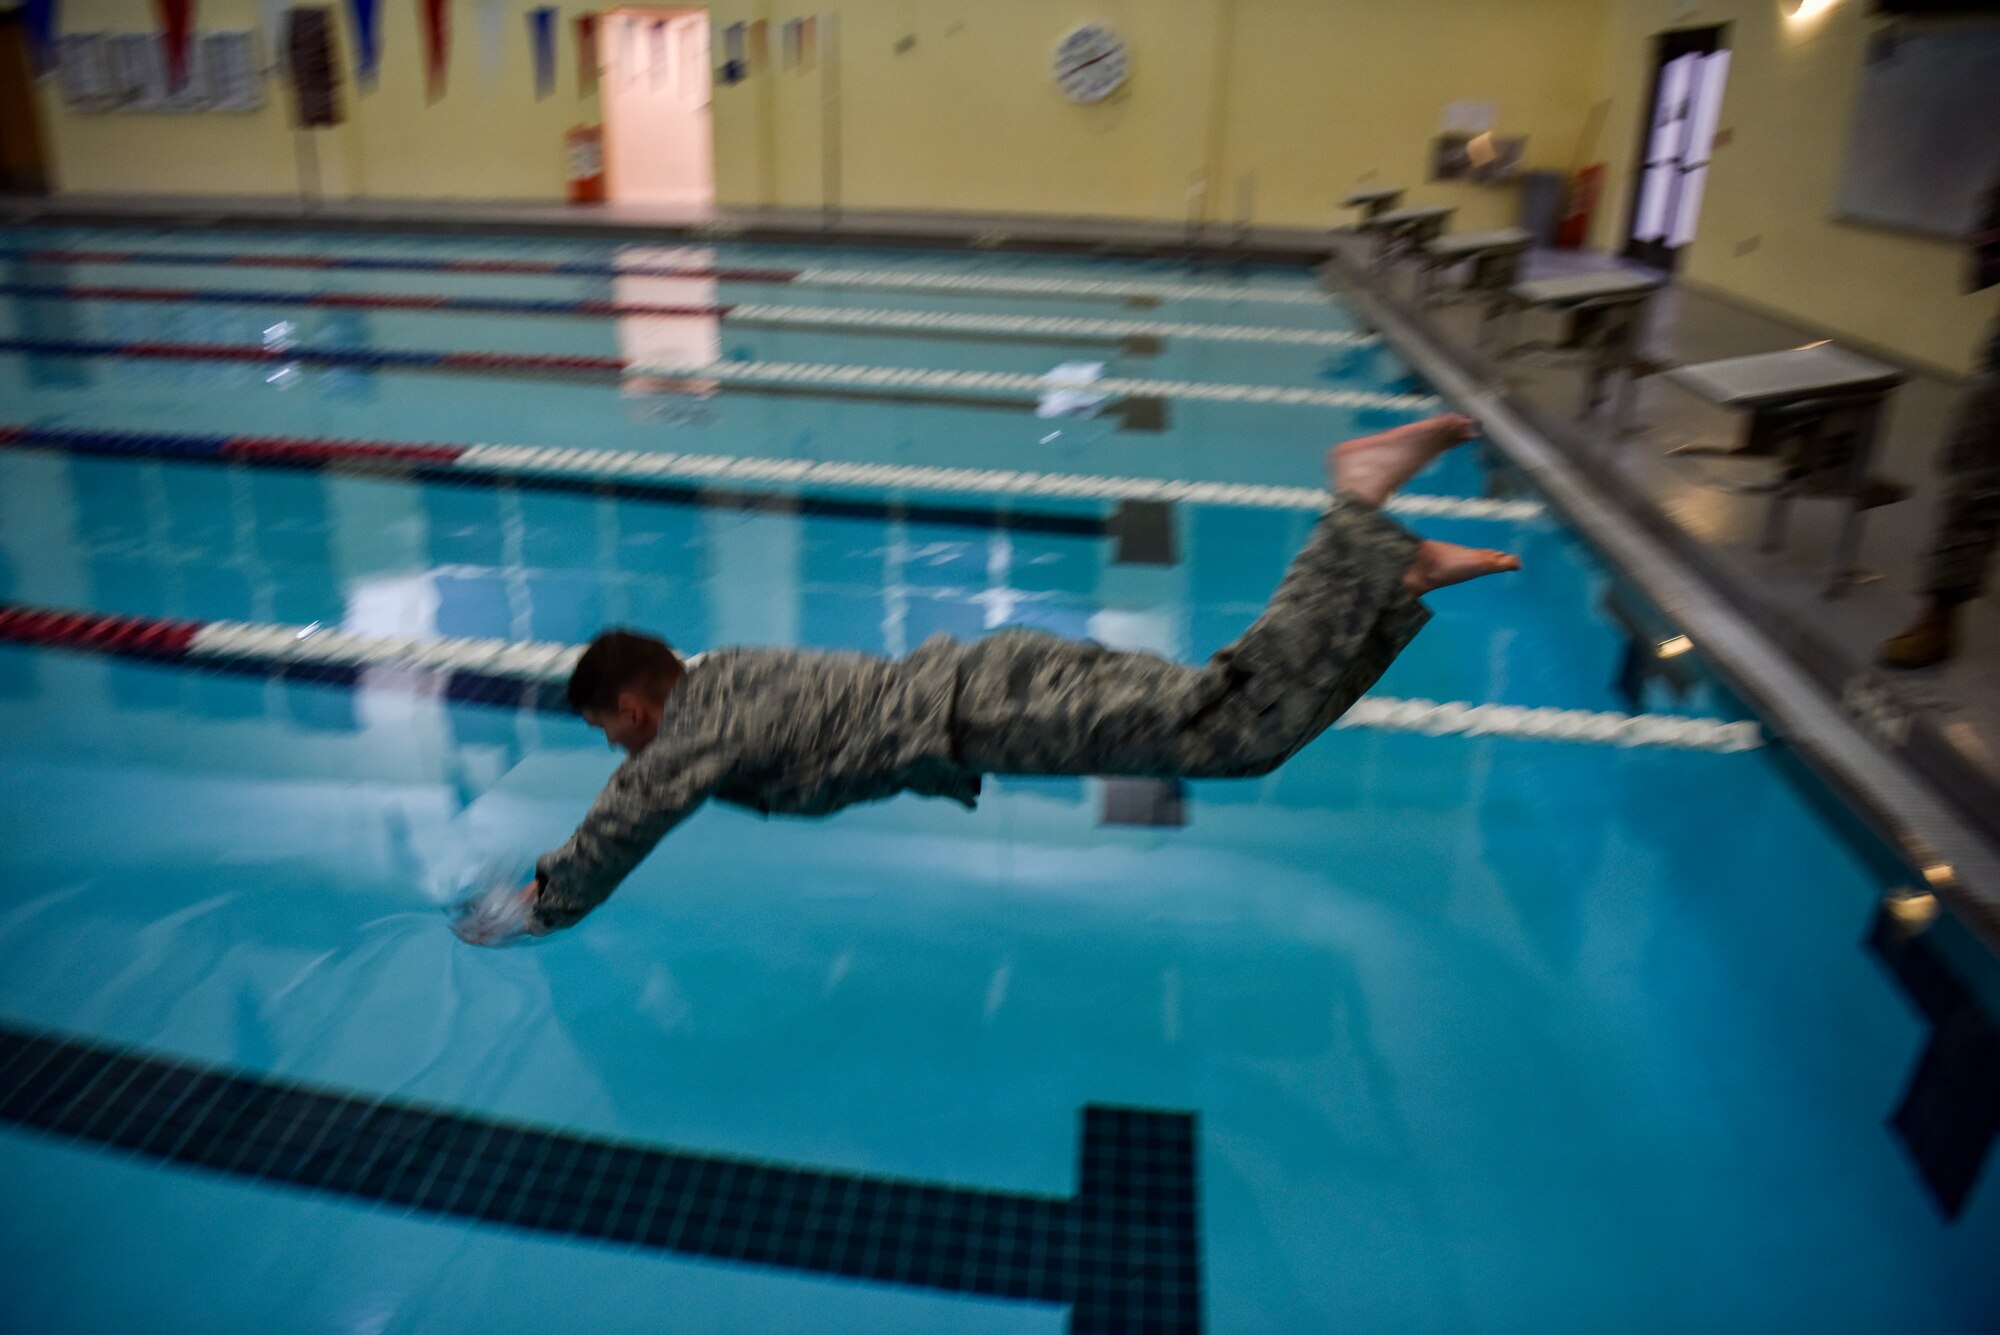 Staff Sgt. James Shanahan, a 47th Security Forces Squadron patrolman, jumps into a pool at Laughlin Air Force Base, Texas, Oct. 10, 2019. A total of 11 defenders volunteered for the pre-qualification stages to earn the German Armed Forces Badge for Military Proficiency. (U.S. Air Force photo by Senior Airman Marco A. Gomez)